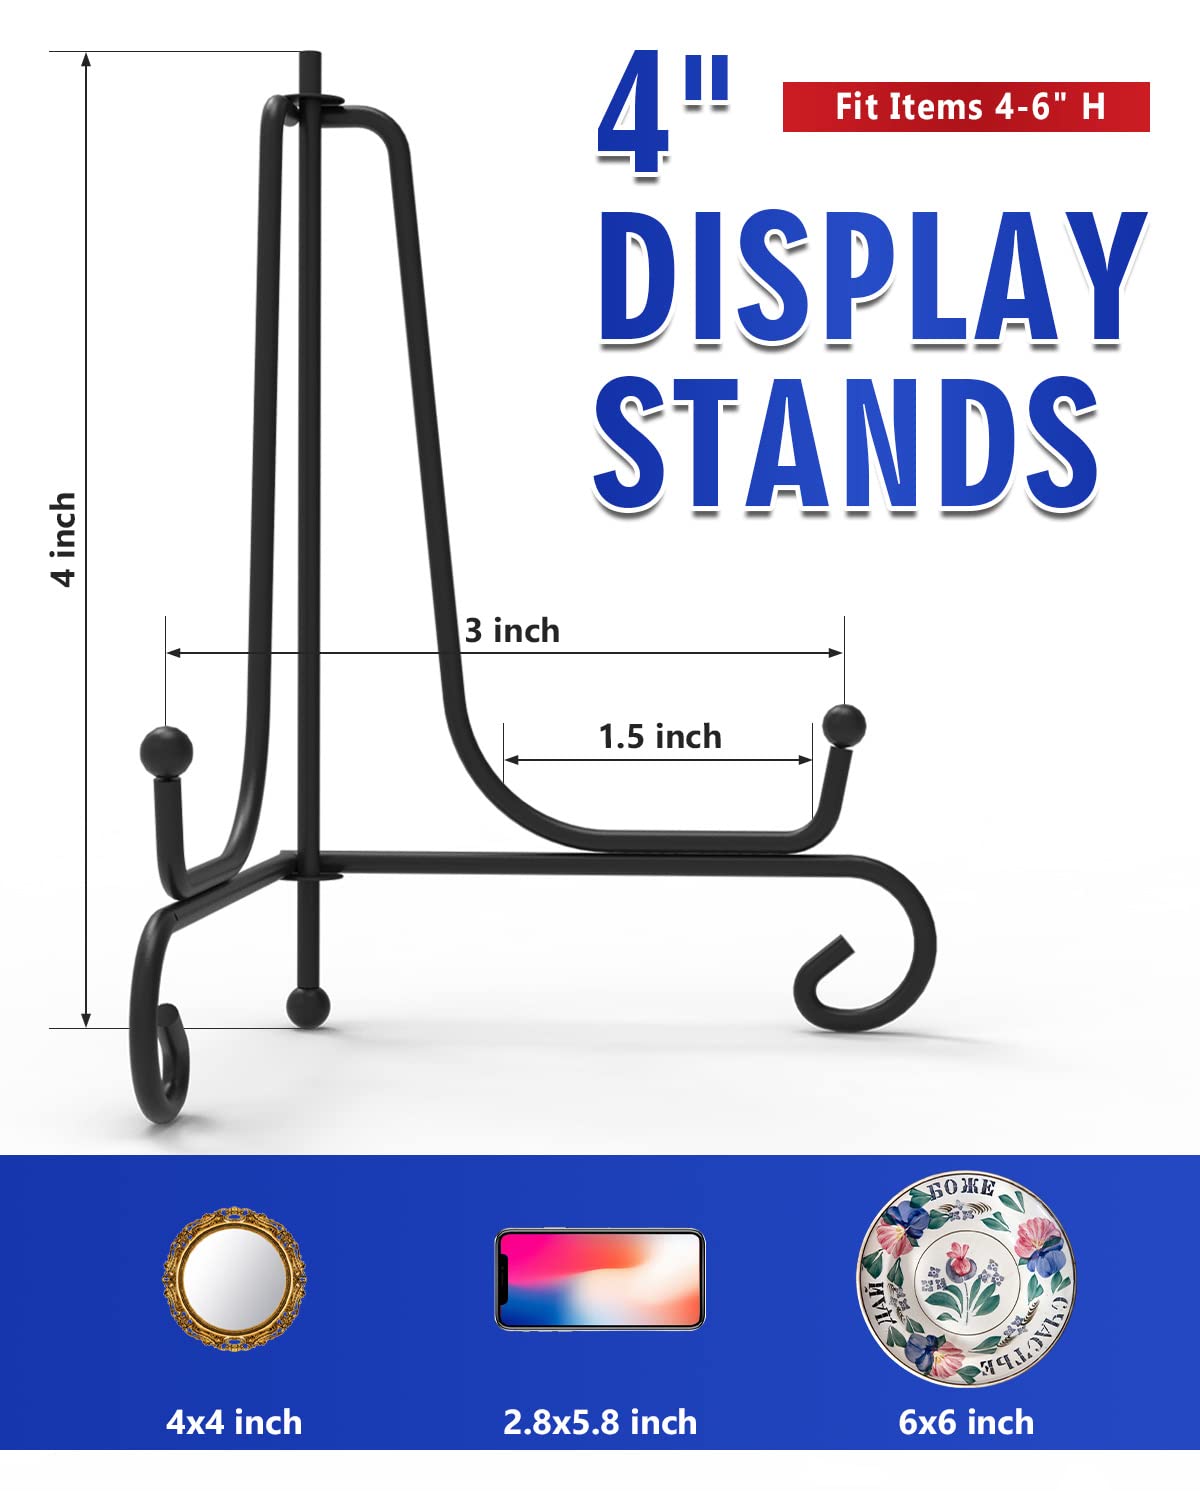 Lzerking Iron Display Stand 5 Packs, 4 Inches Plate Stand Picture Stand Photo Stand for Display, Black Foldable Easel Stand Holder for Photo Frame, Artwork, Collection, Decorative Plate, Book, Office